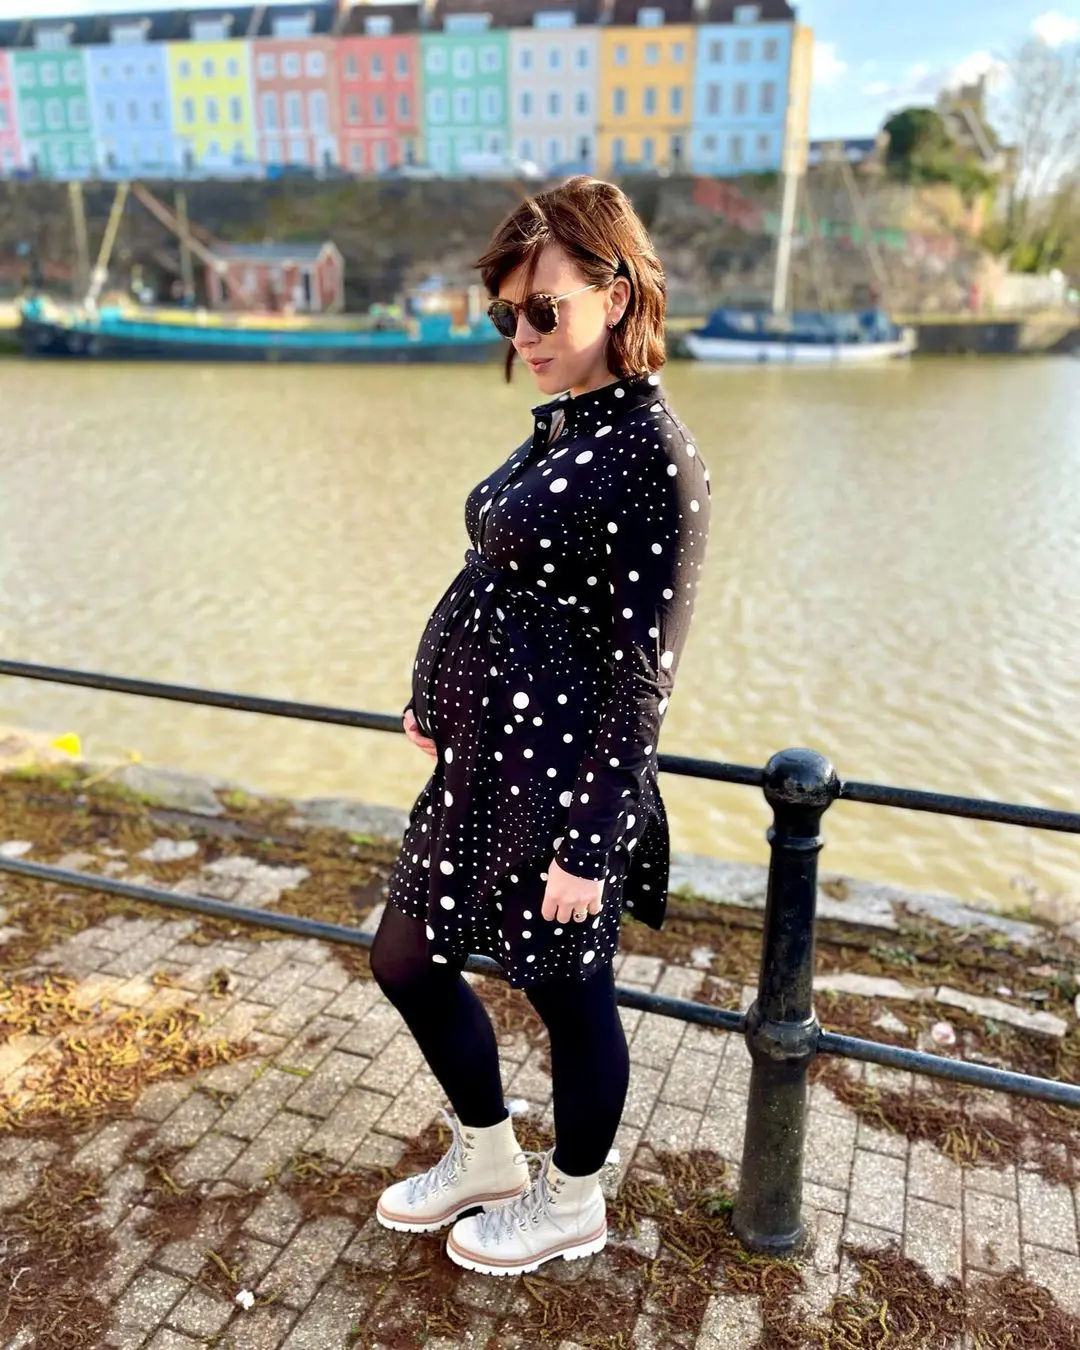 She took to Instagram to announce her pregnancy on 17 March 2021